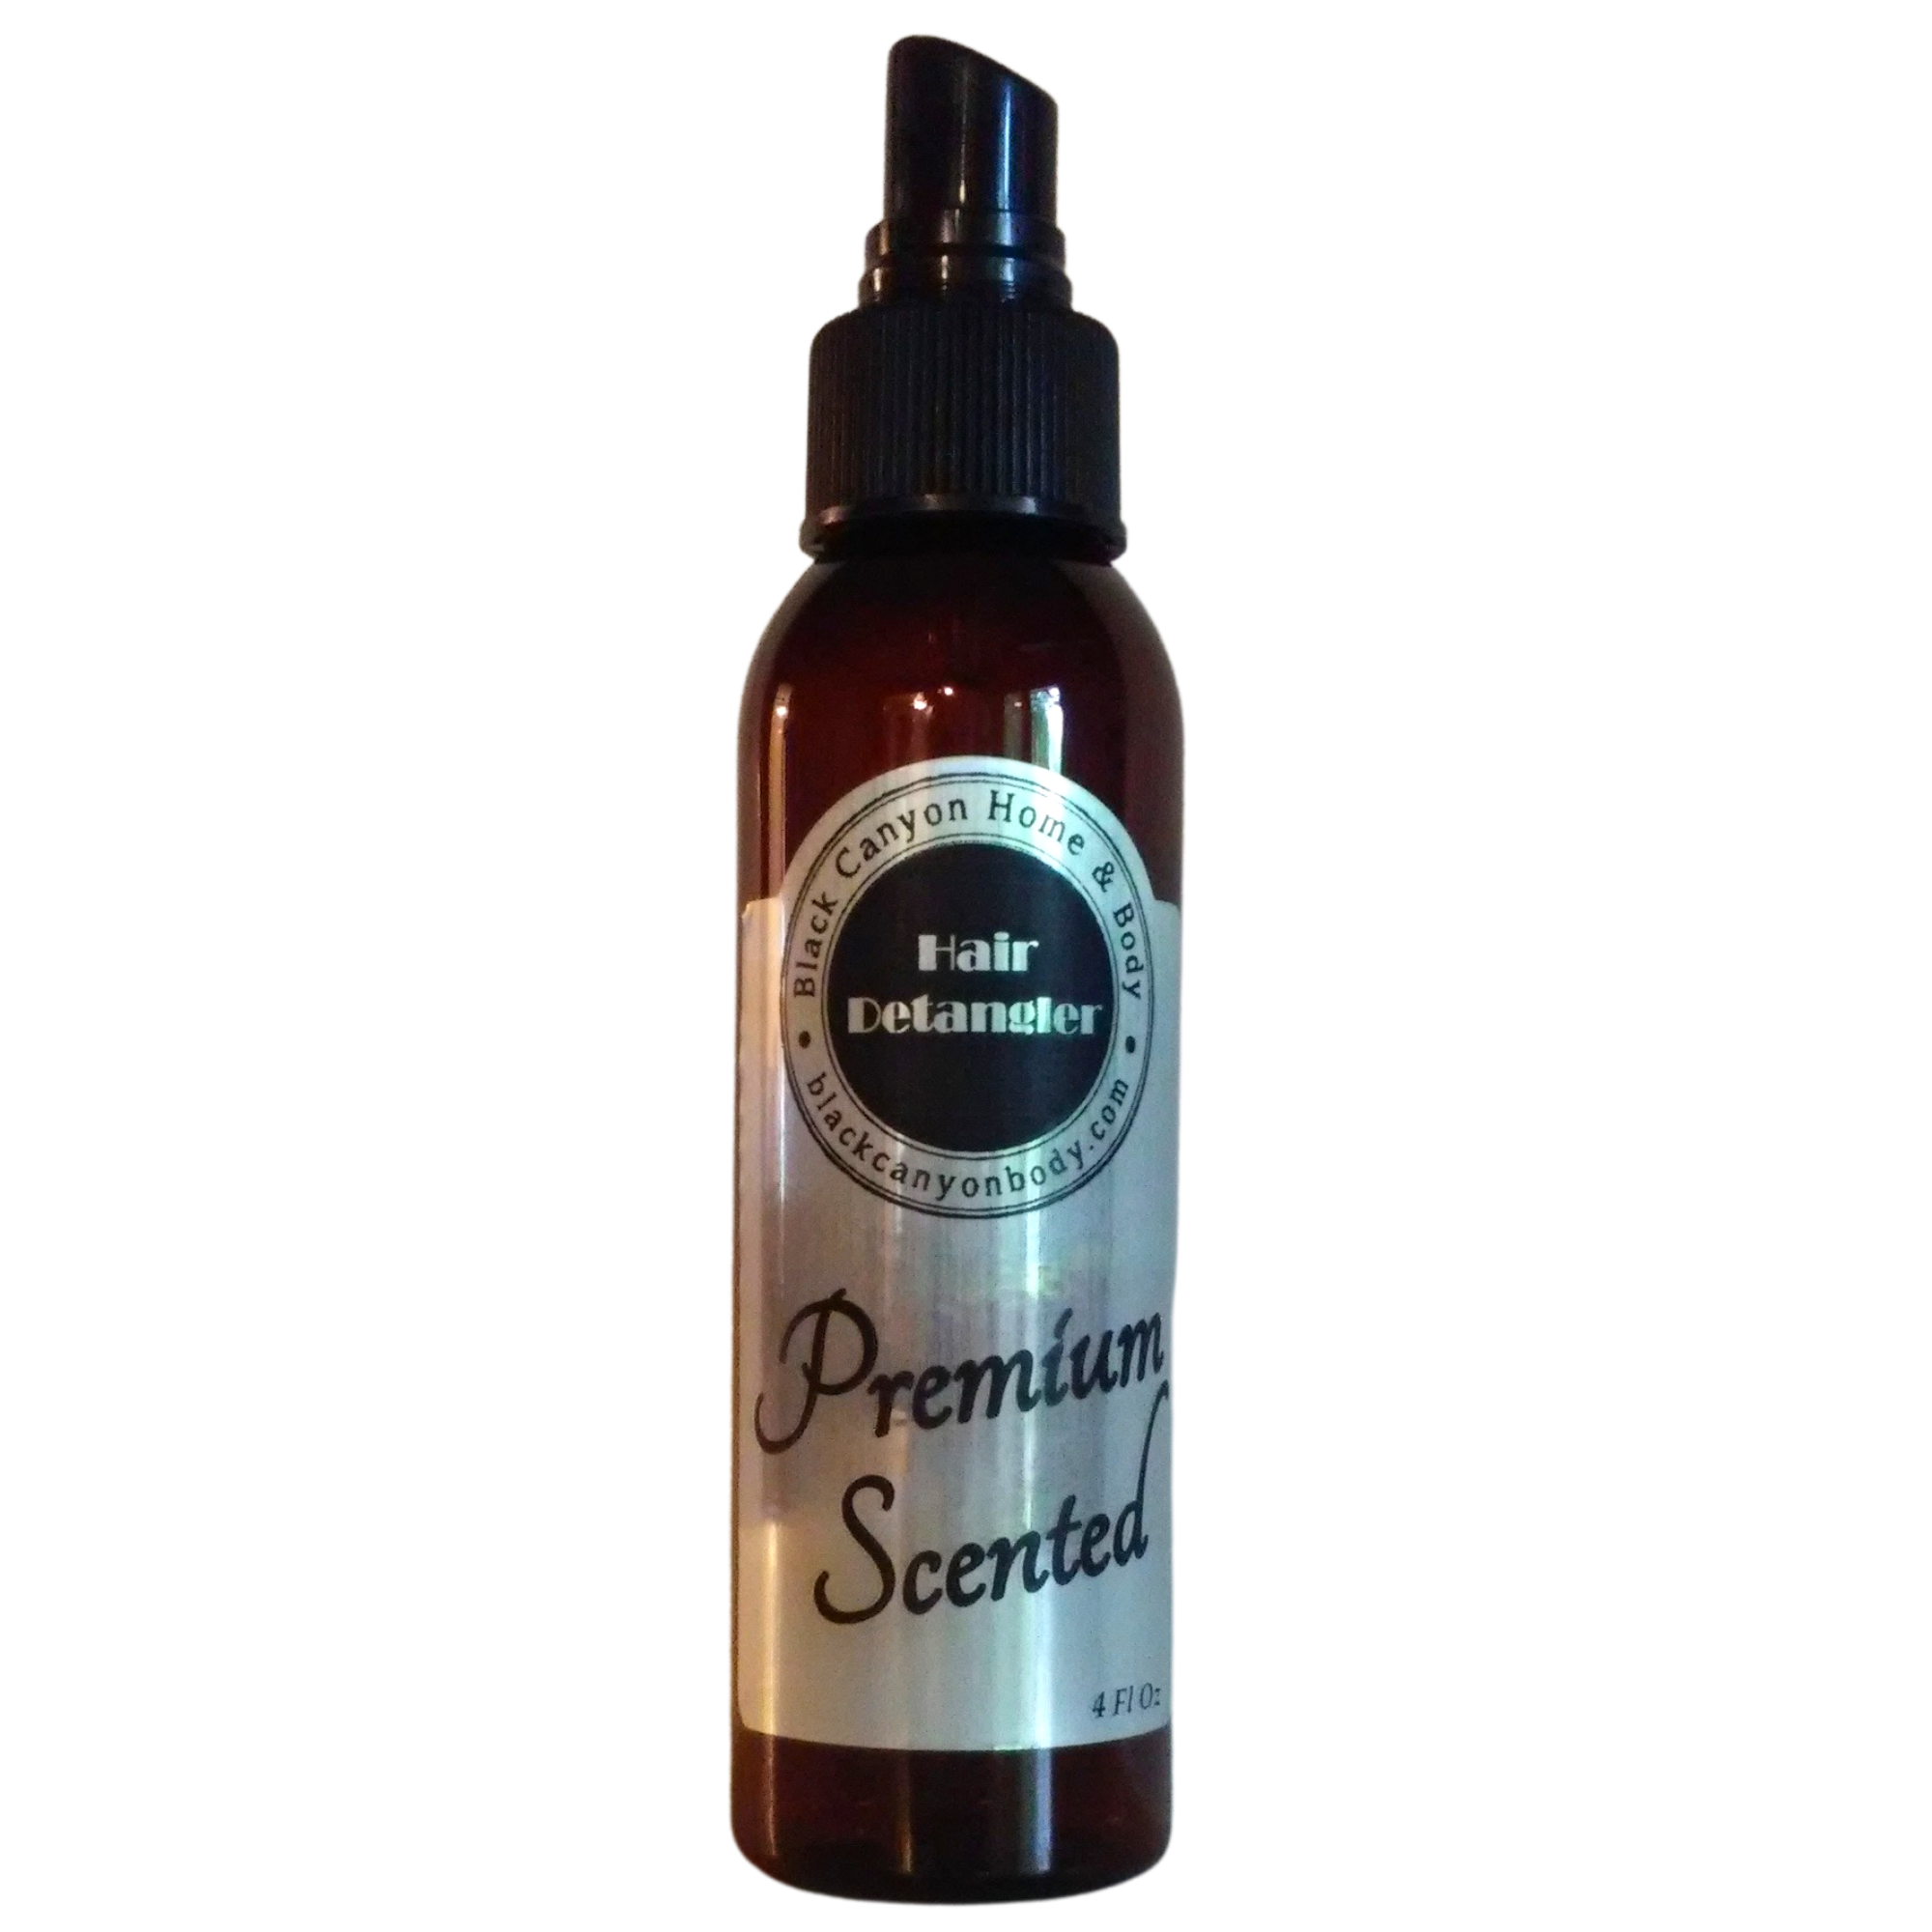 Black Canyon Leather & Jasmine Scented Hair Detangler Spray with Olive Oil